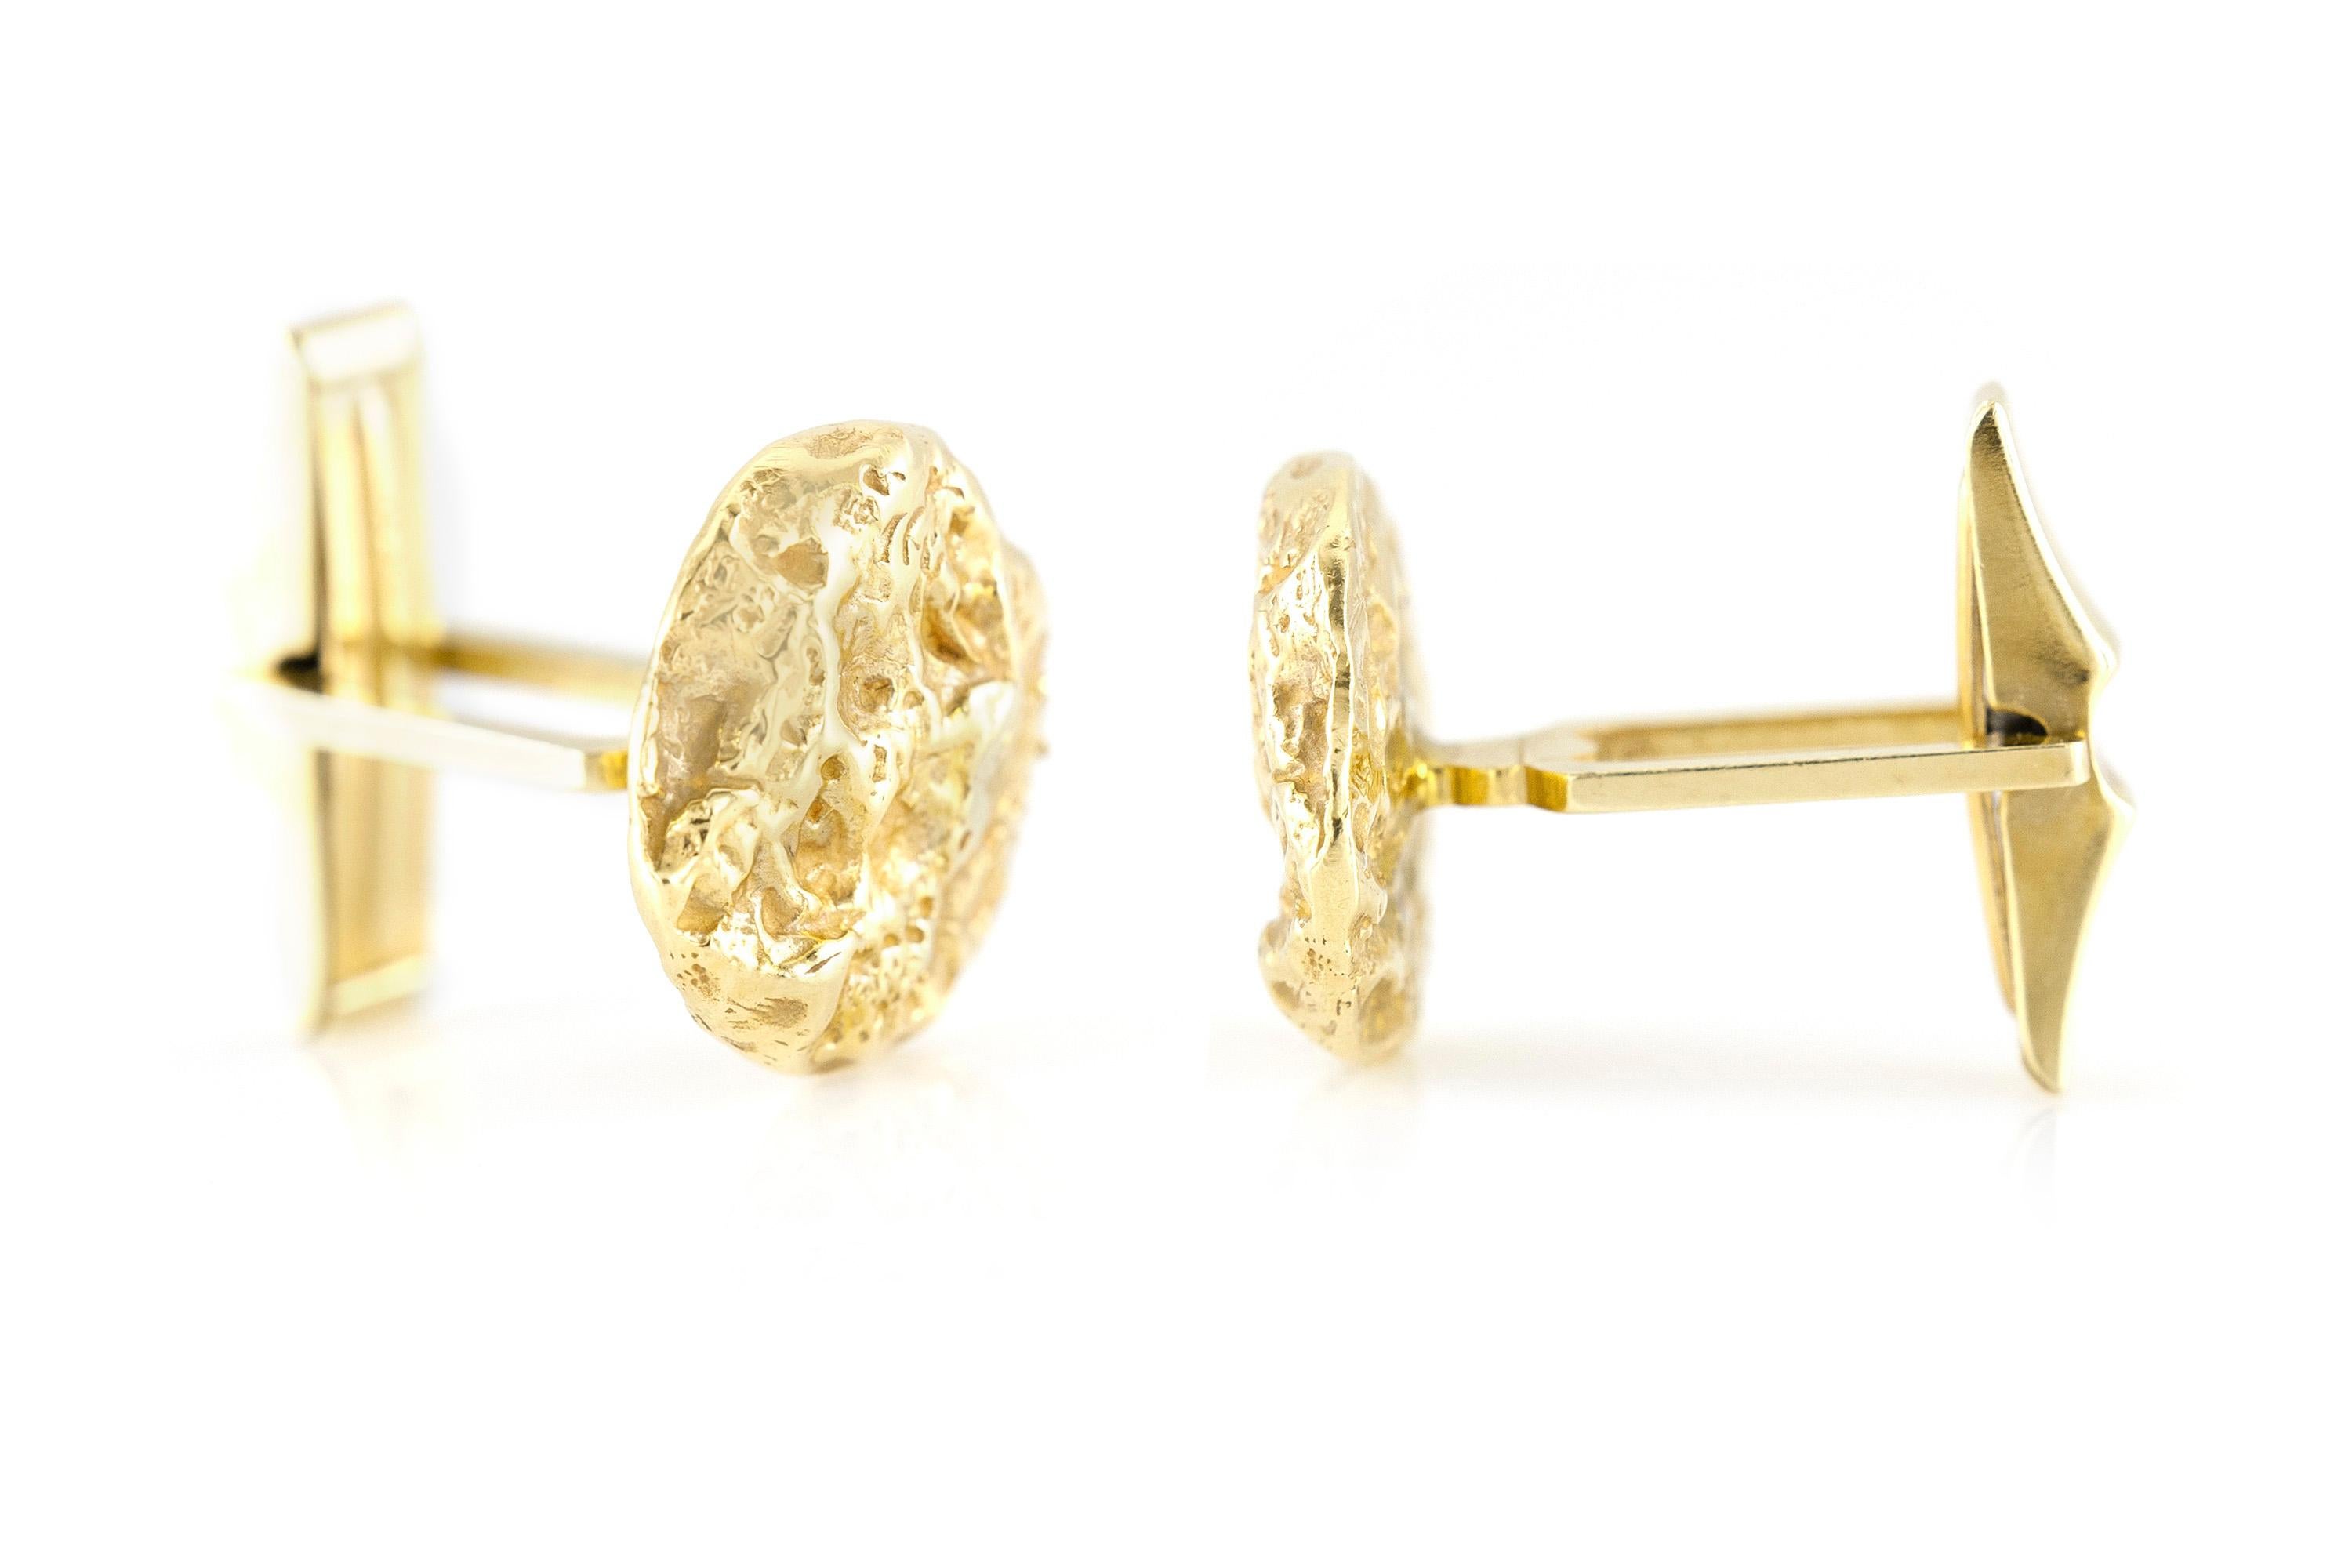 Cufflinks finely crafted in 14k yellow gold weighing a total of 8.5 dwt., size of each cufflink is 0.75 inch. Circa 1920.